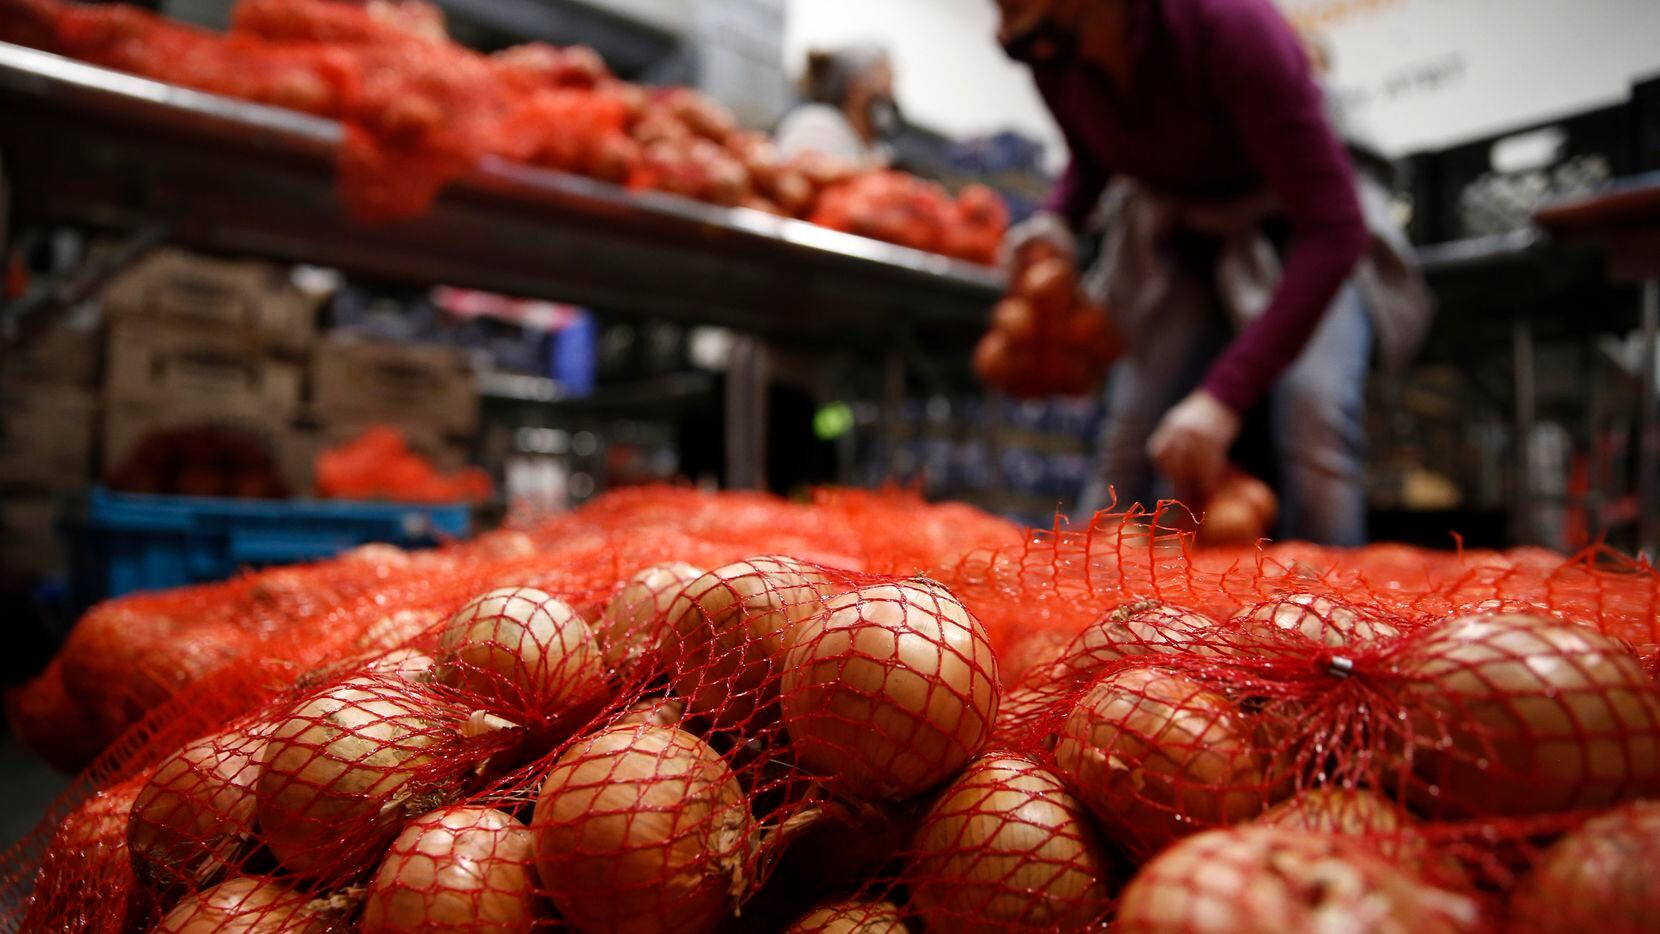 One source of infections had been traced to onions imported from Chihuahua, Mexico, and...